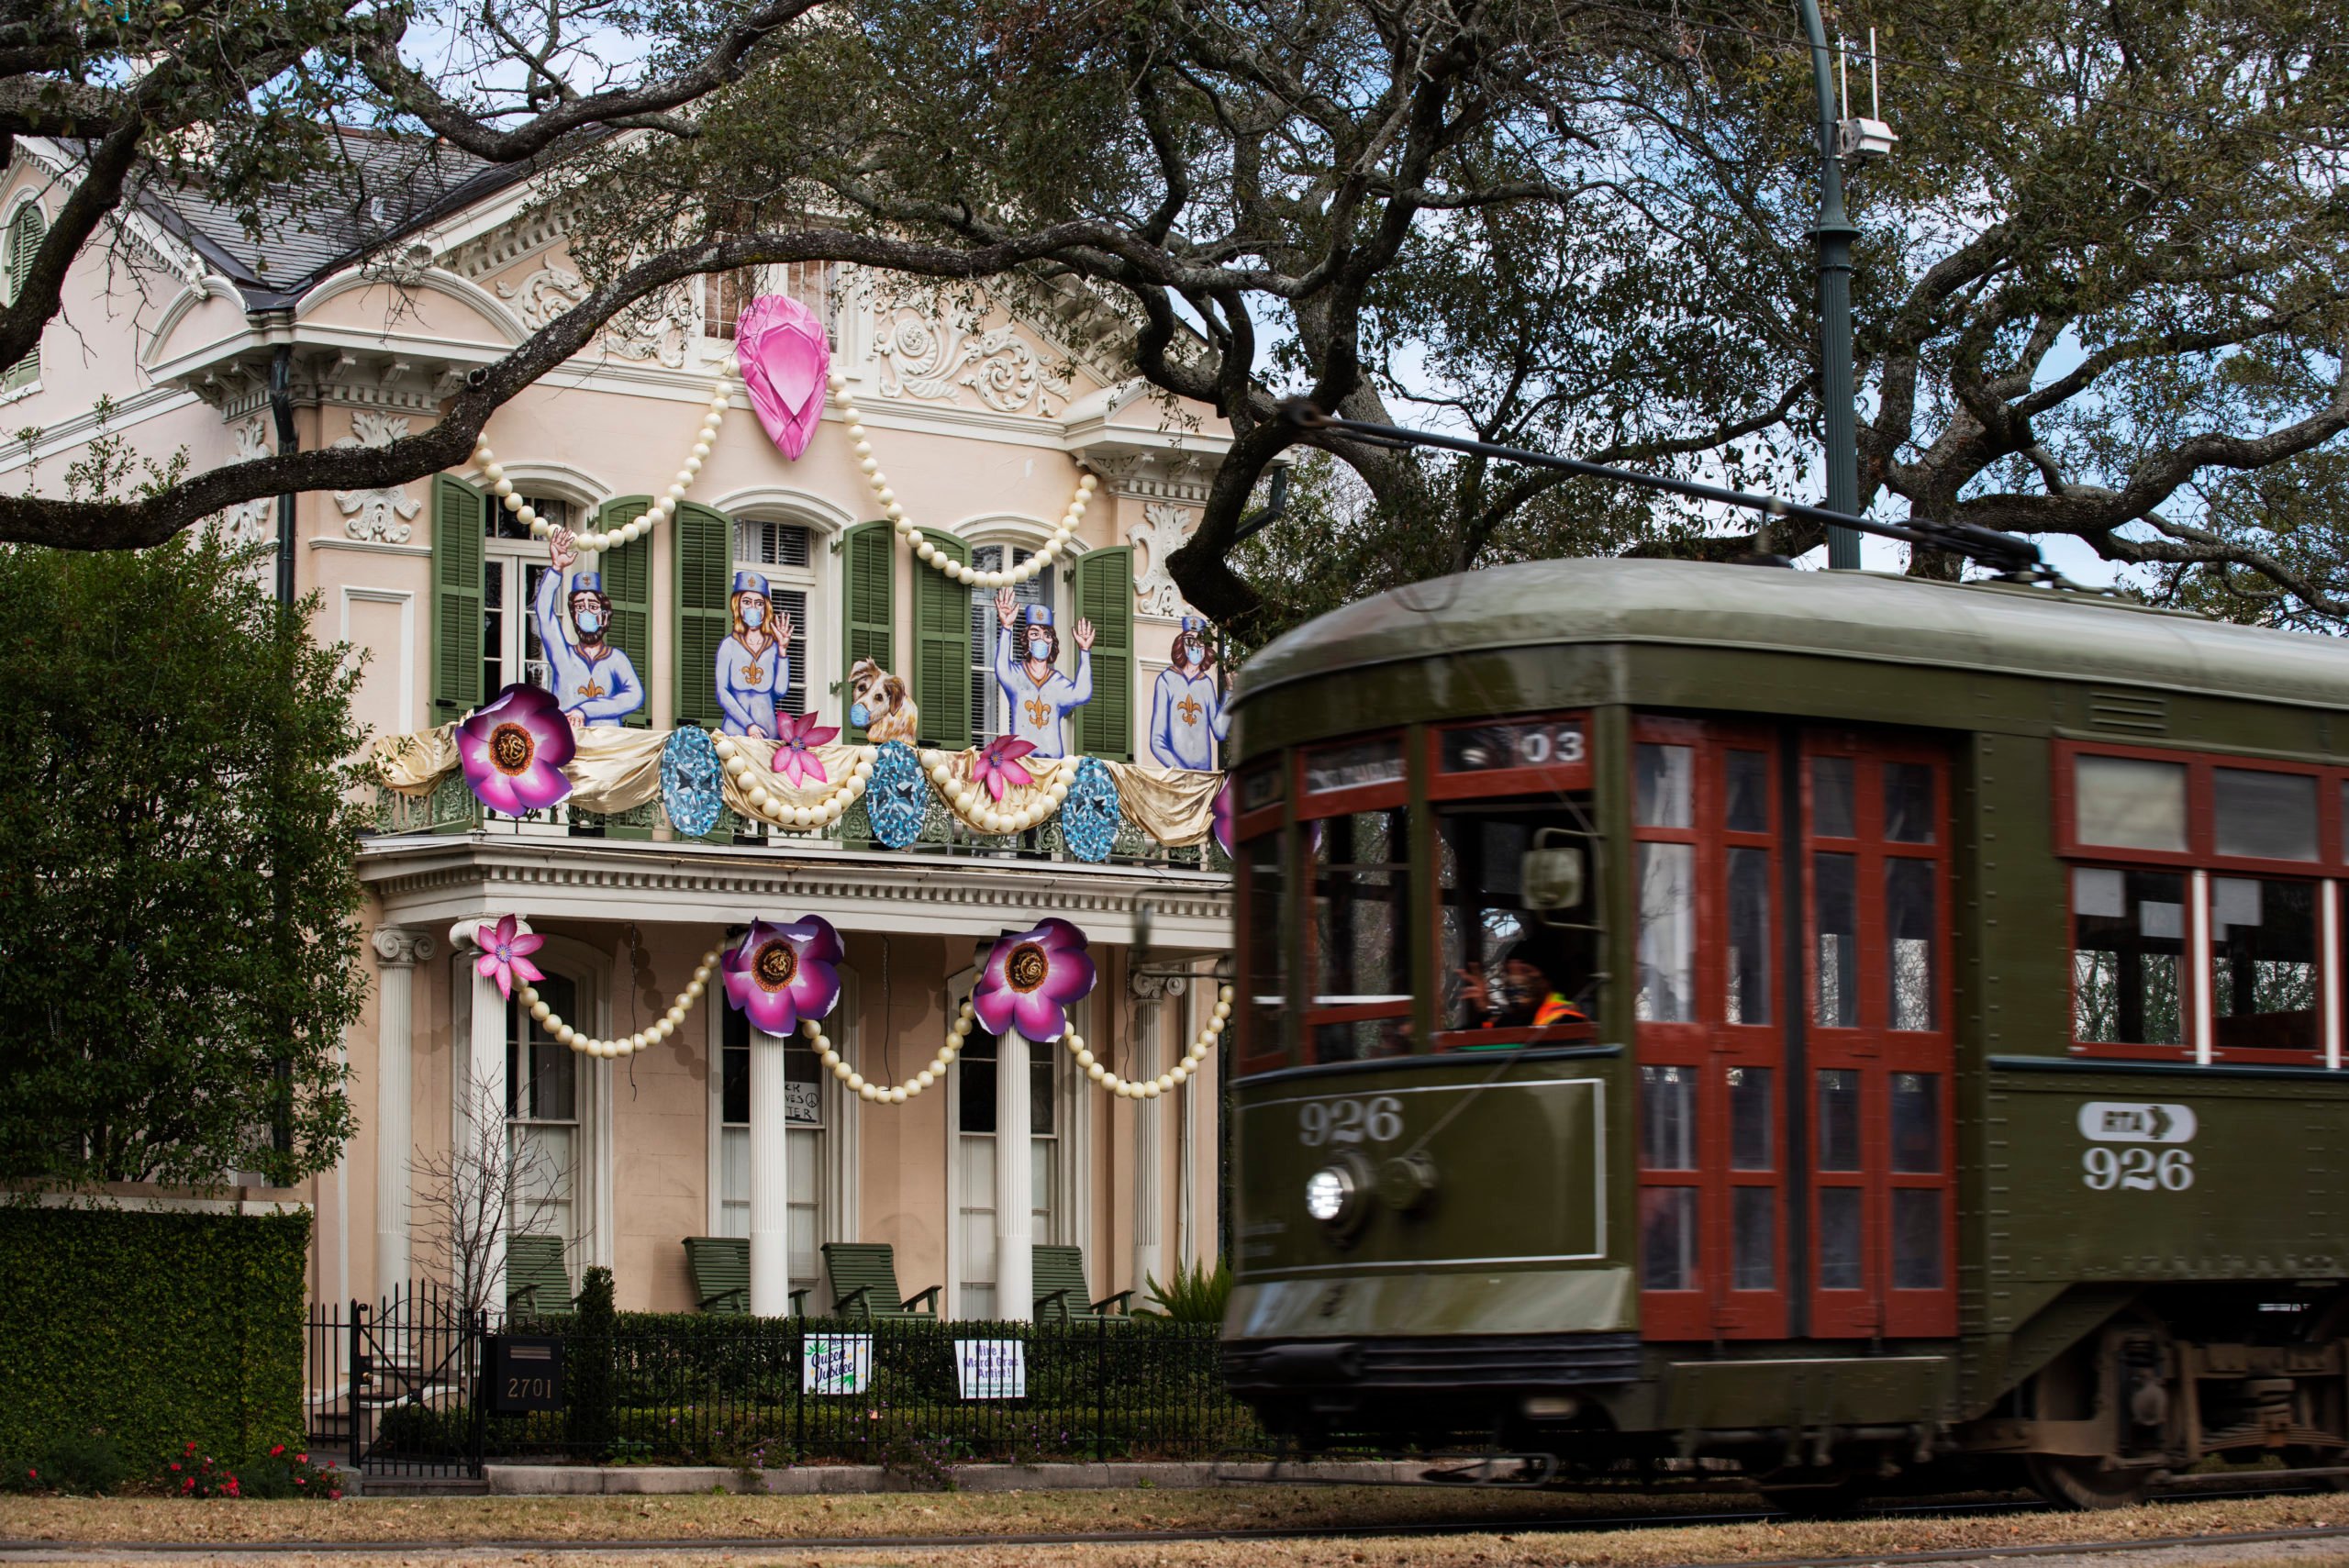 The Wildly Creative Way New Orleans is Celebrating Mardi Gras